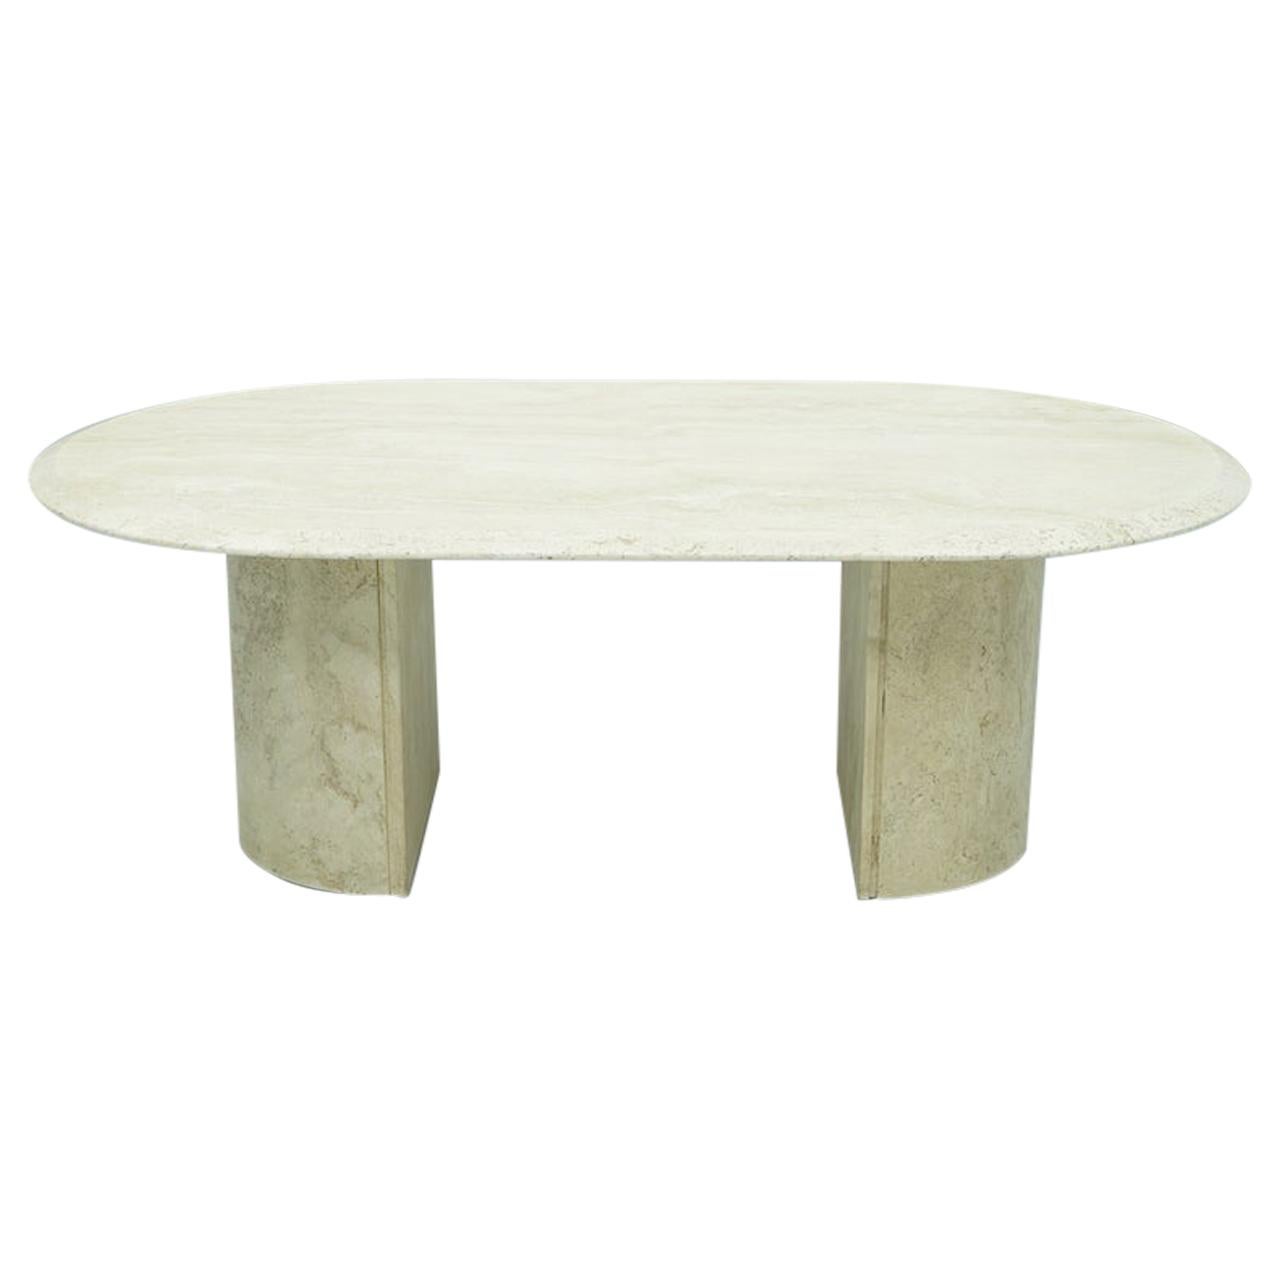 Oval Travertine Coffee Table, Italy, 1970s